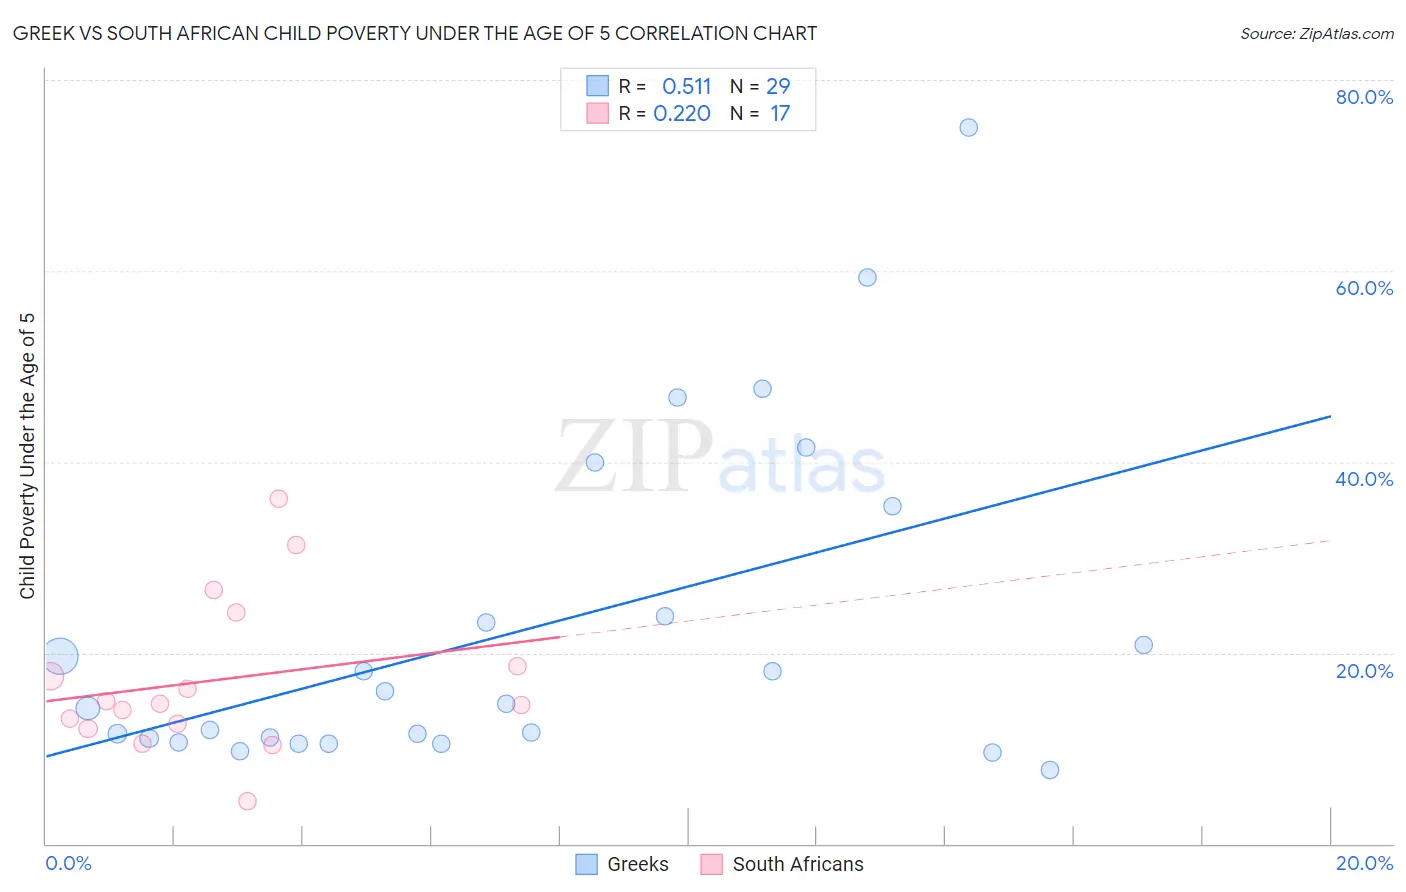 Greek vs South African Child Poverty Under the Age of 5